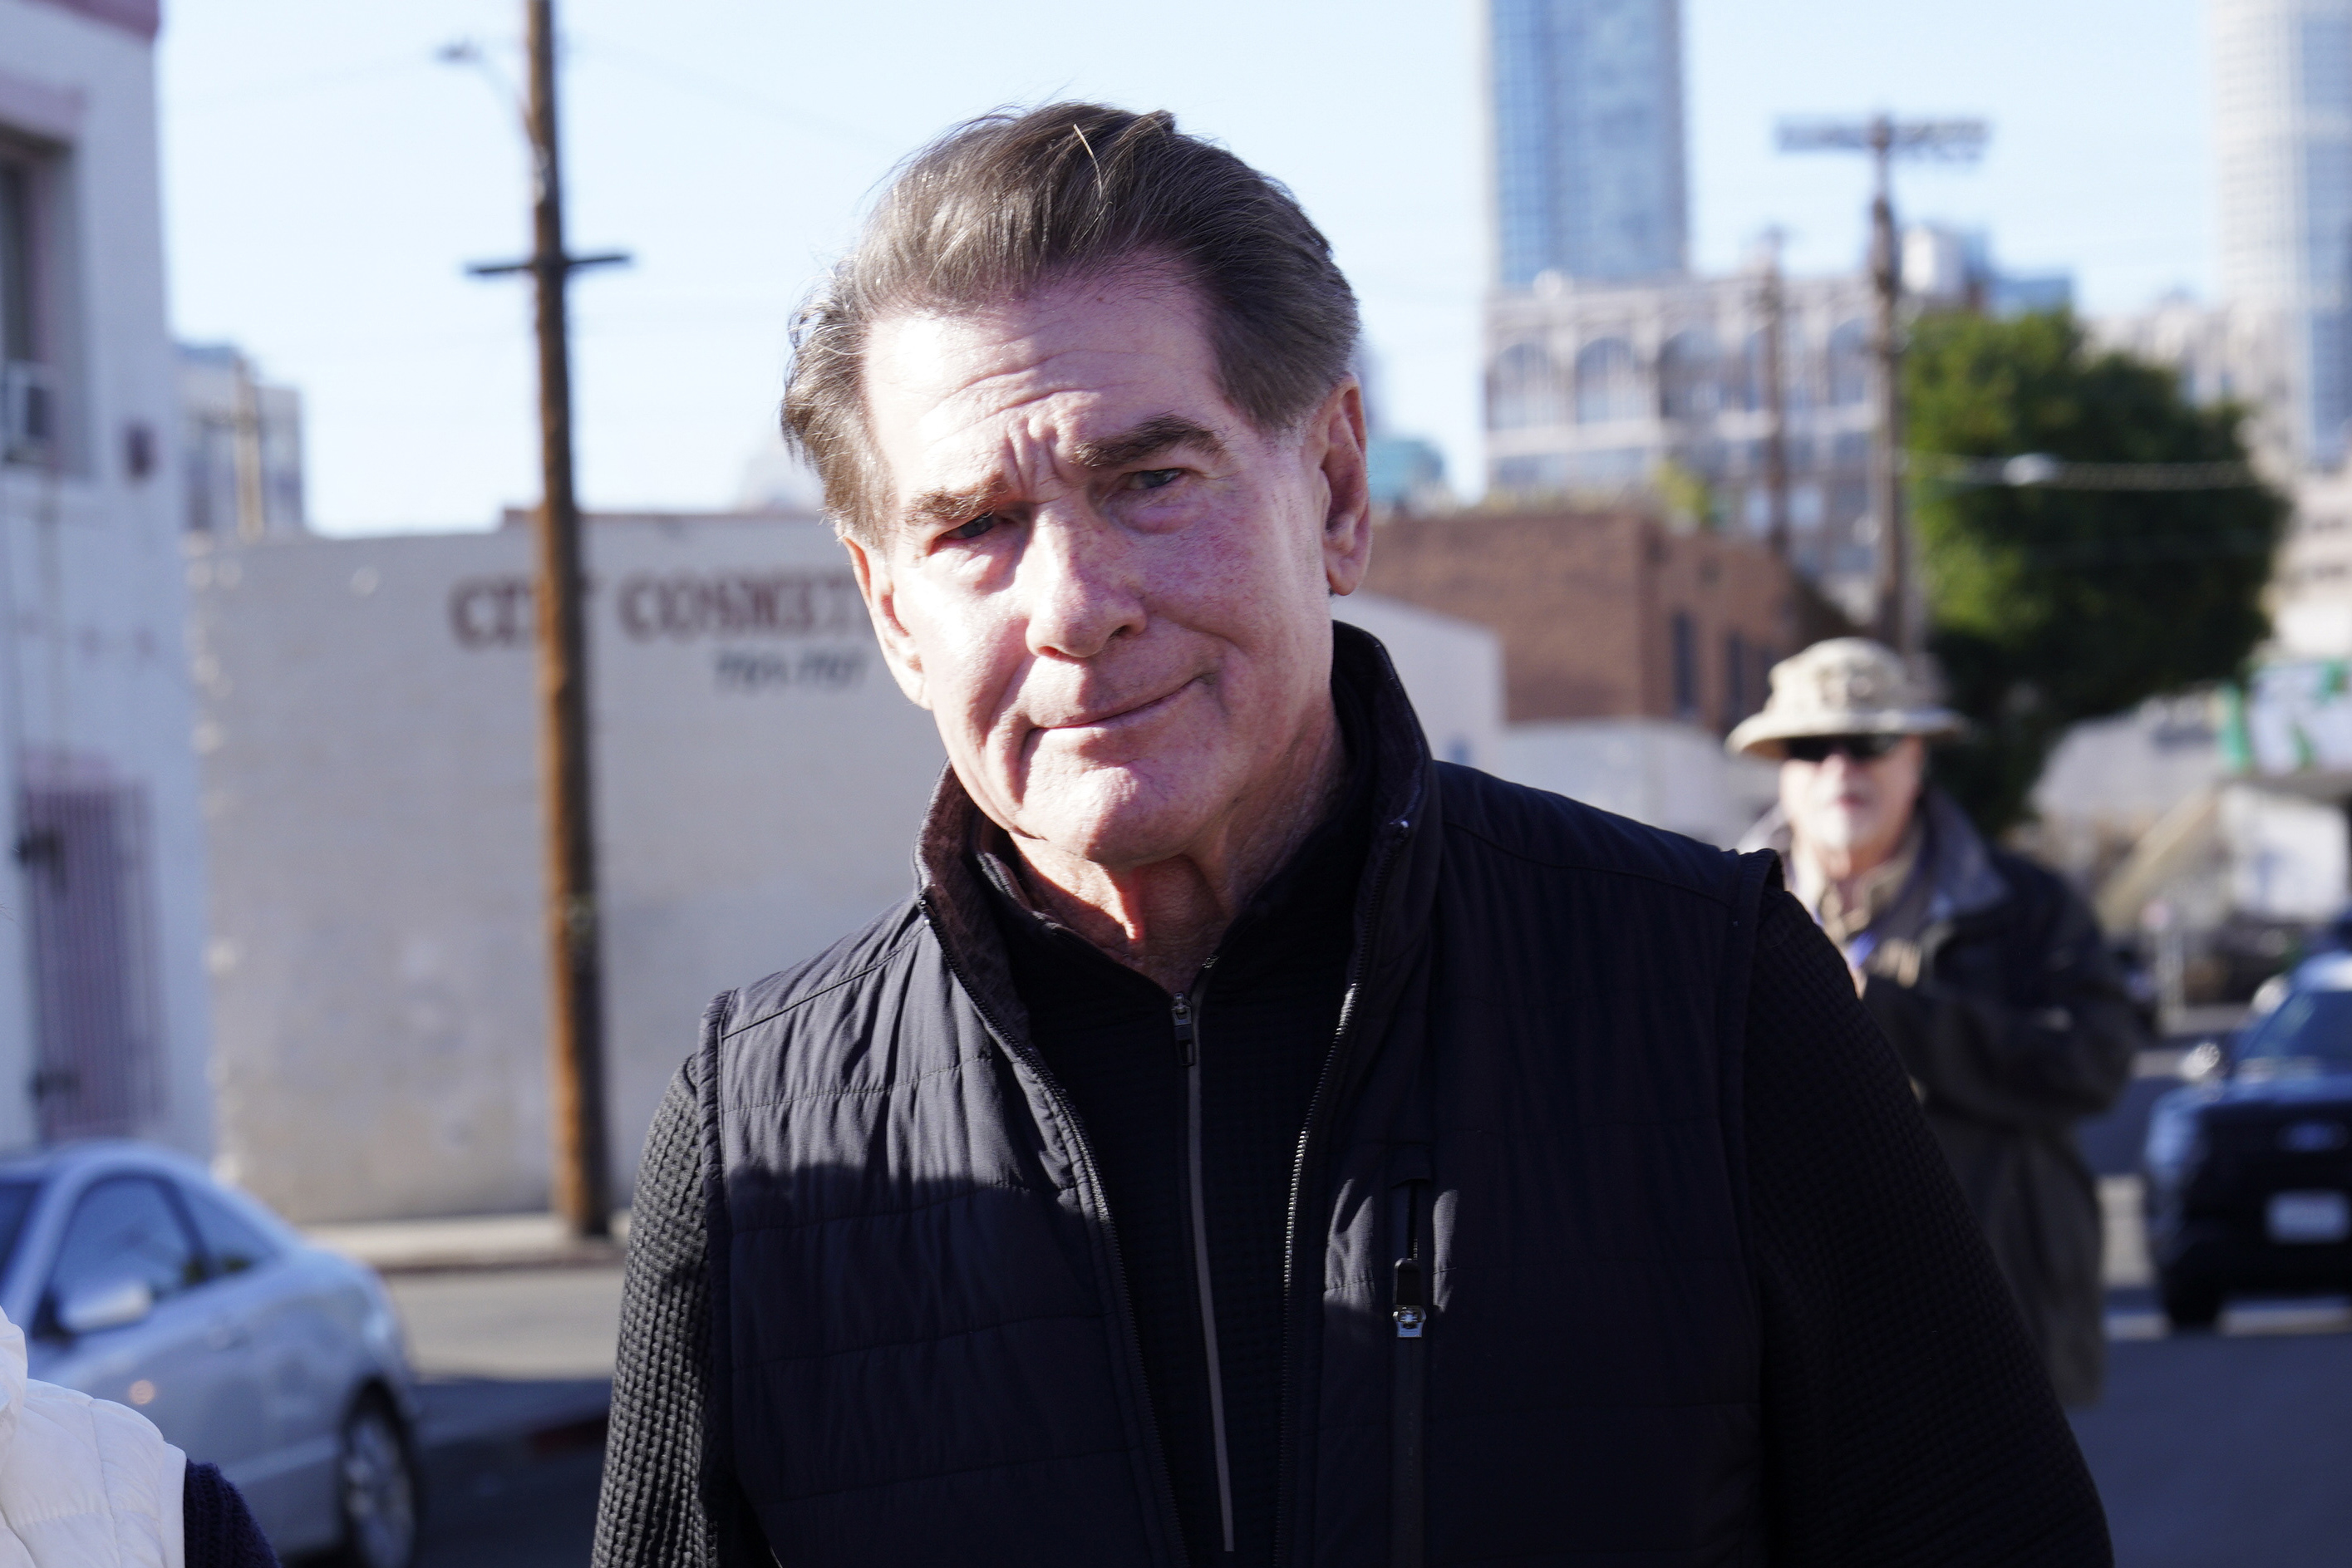 An older man with combed-back hair, wearing a black jacket, is in focus with an urban background and another person behind him.